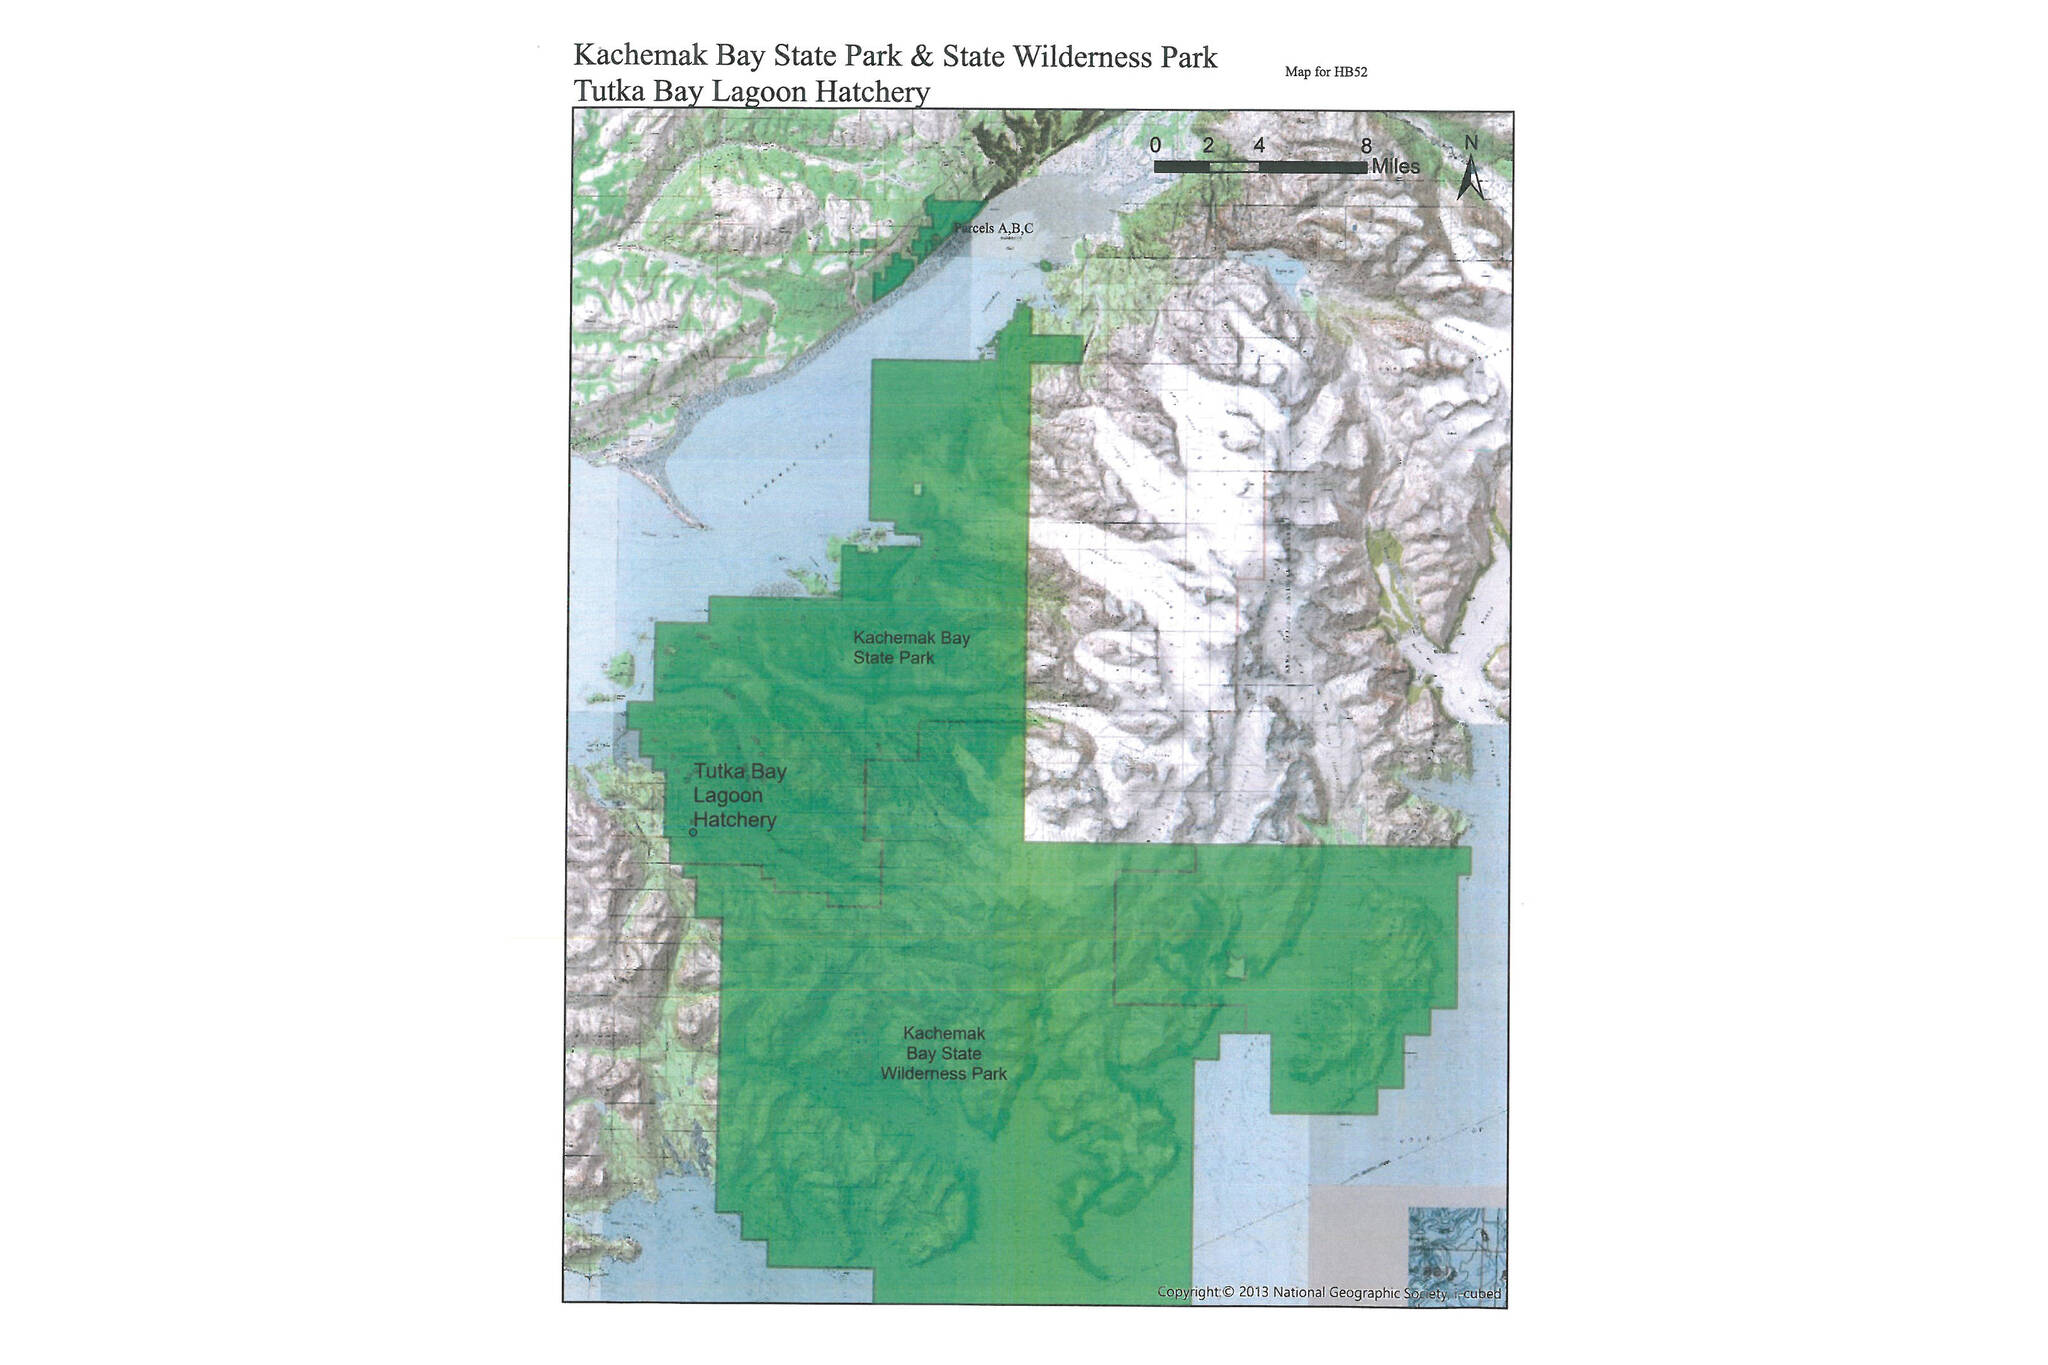 A map of Kachemak Bay State Park showing proposed land additions A, B and C in House Bill 52 and the Tutka Bay Lagoon Hatchery. (Map courtesy of Alaska State Parks)